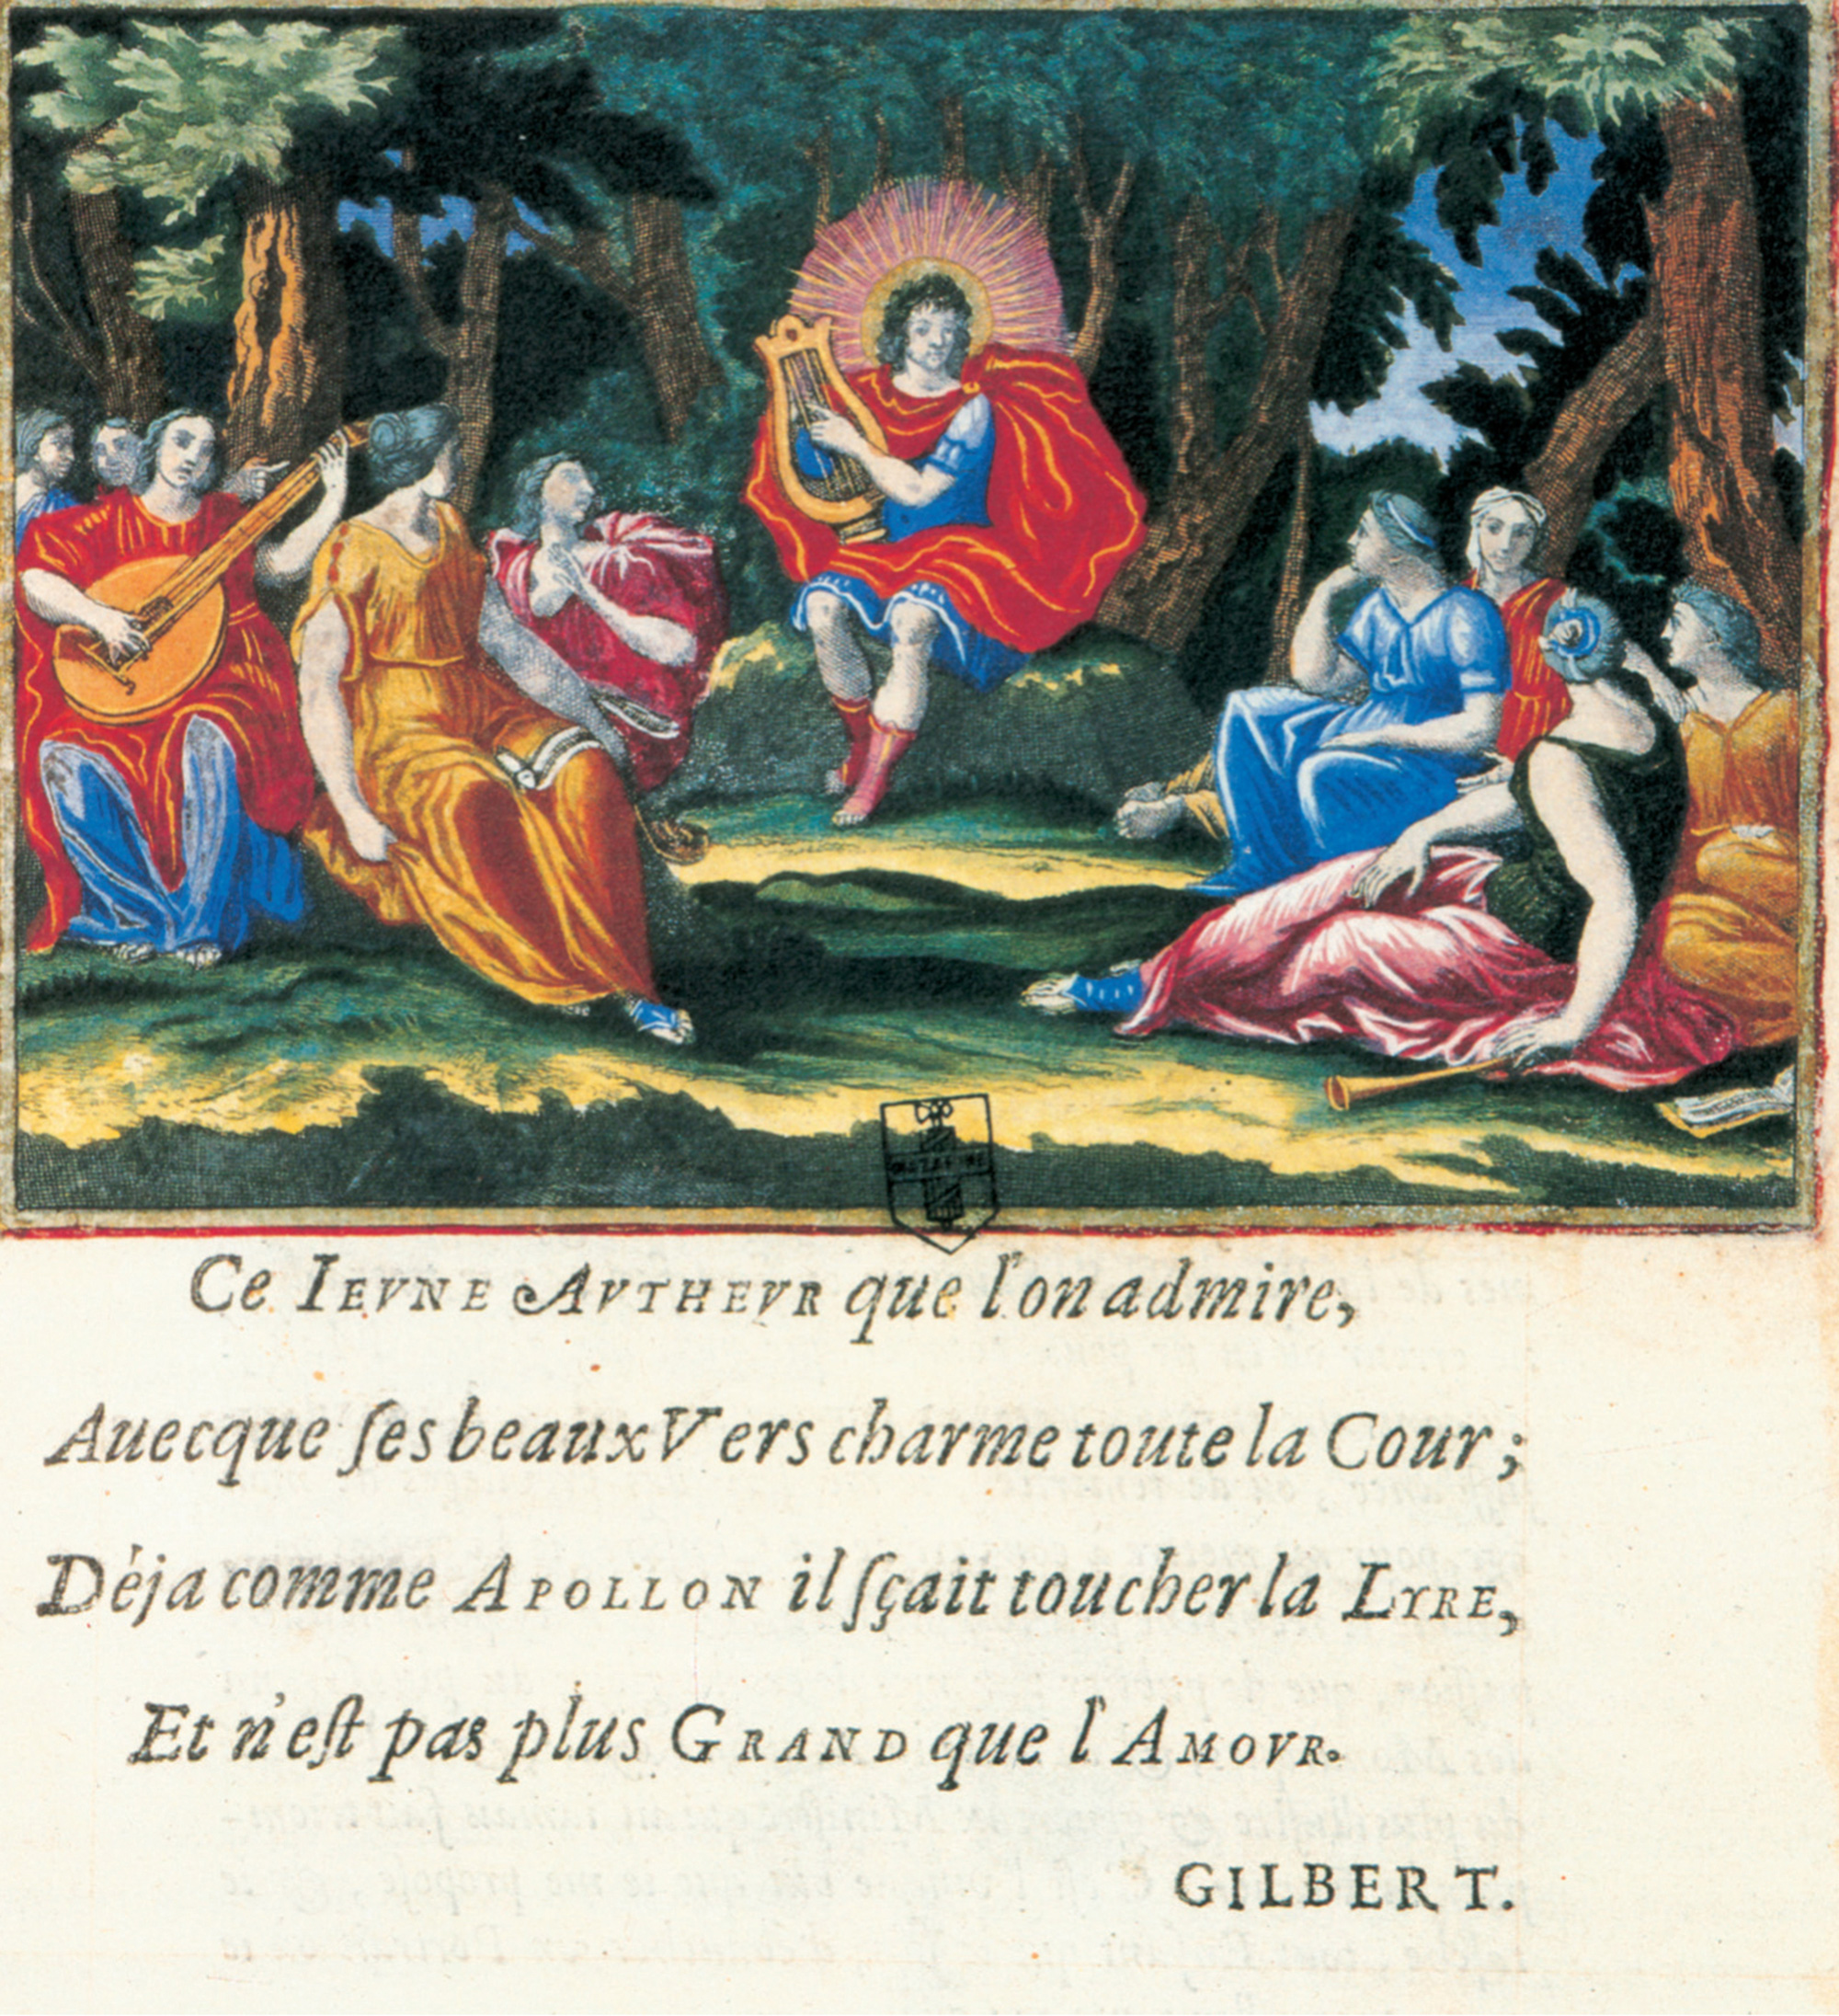 The frontispiece of Beauchasteau’s book showing him as Apollo surrounded by the Muses.